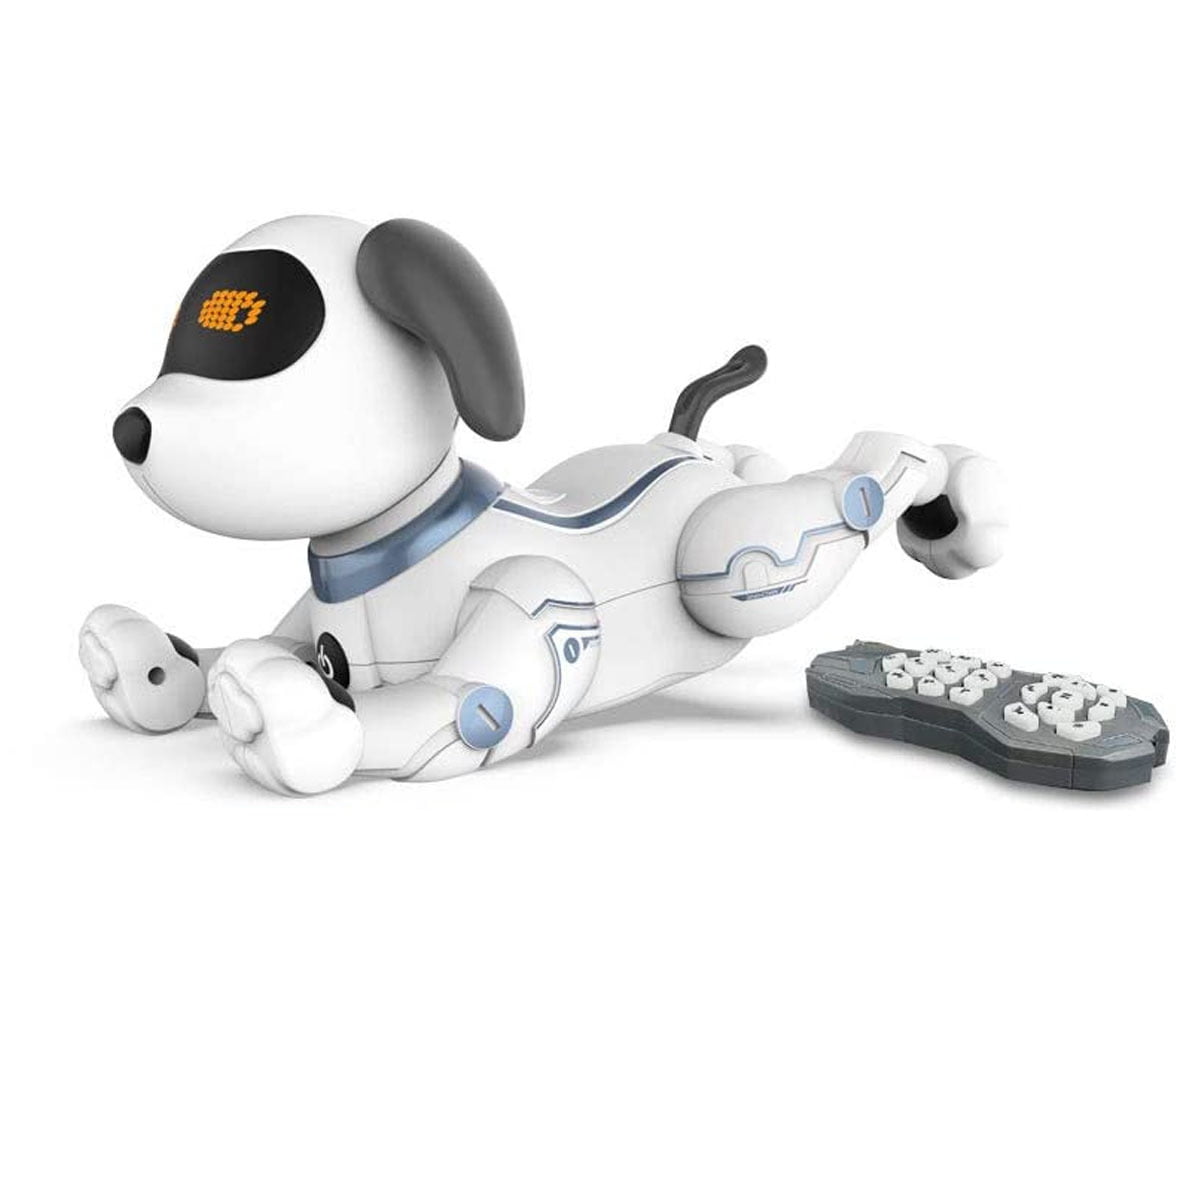 Voice Control Smart Dog Singing Dancing Electronic Puppy Toy Gift for Kids 